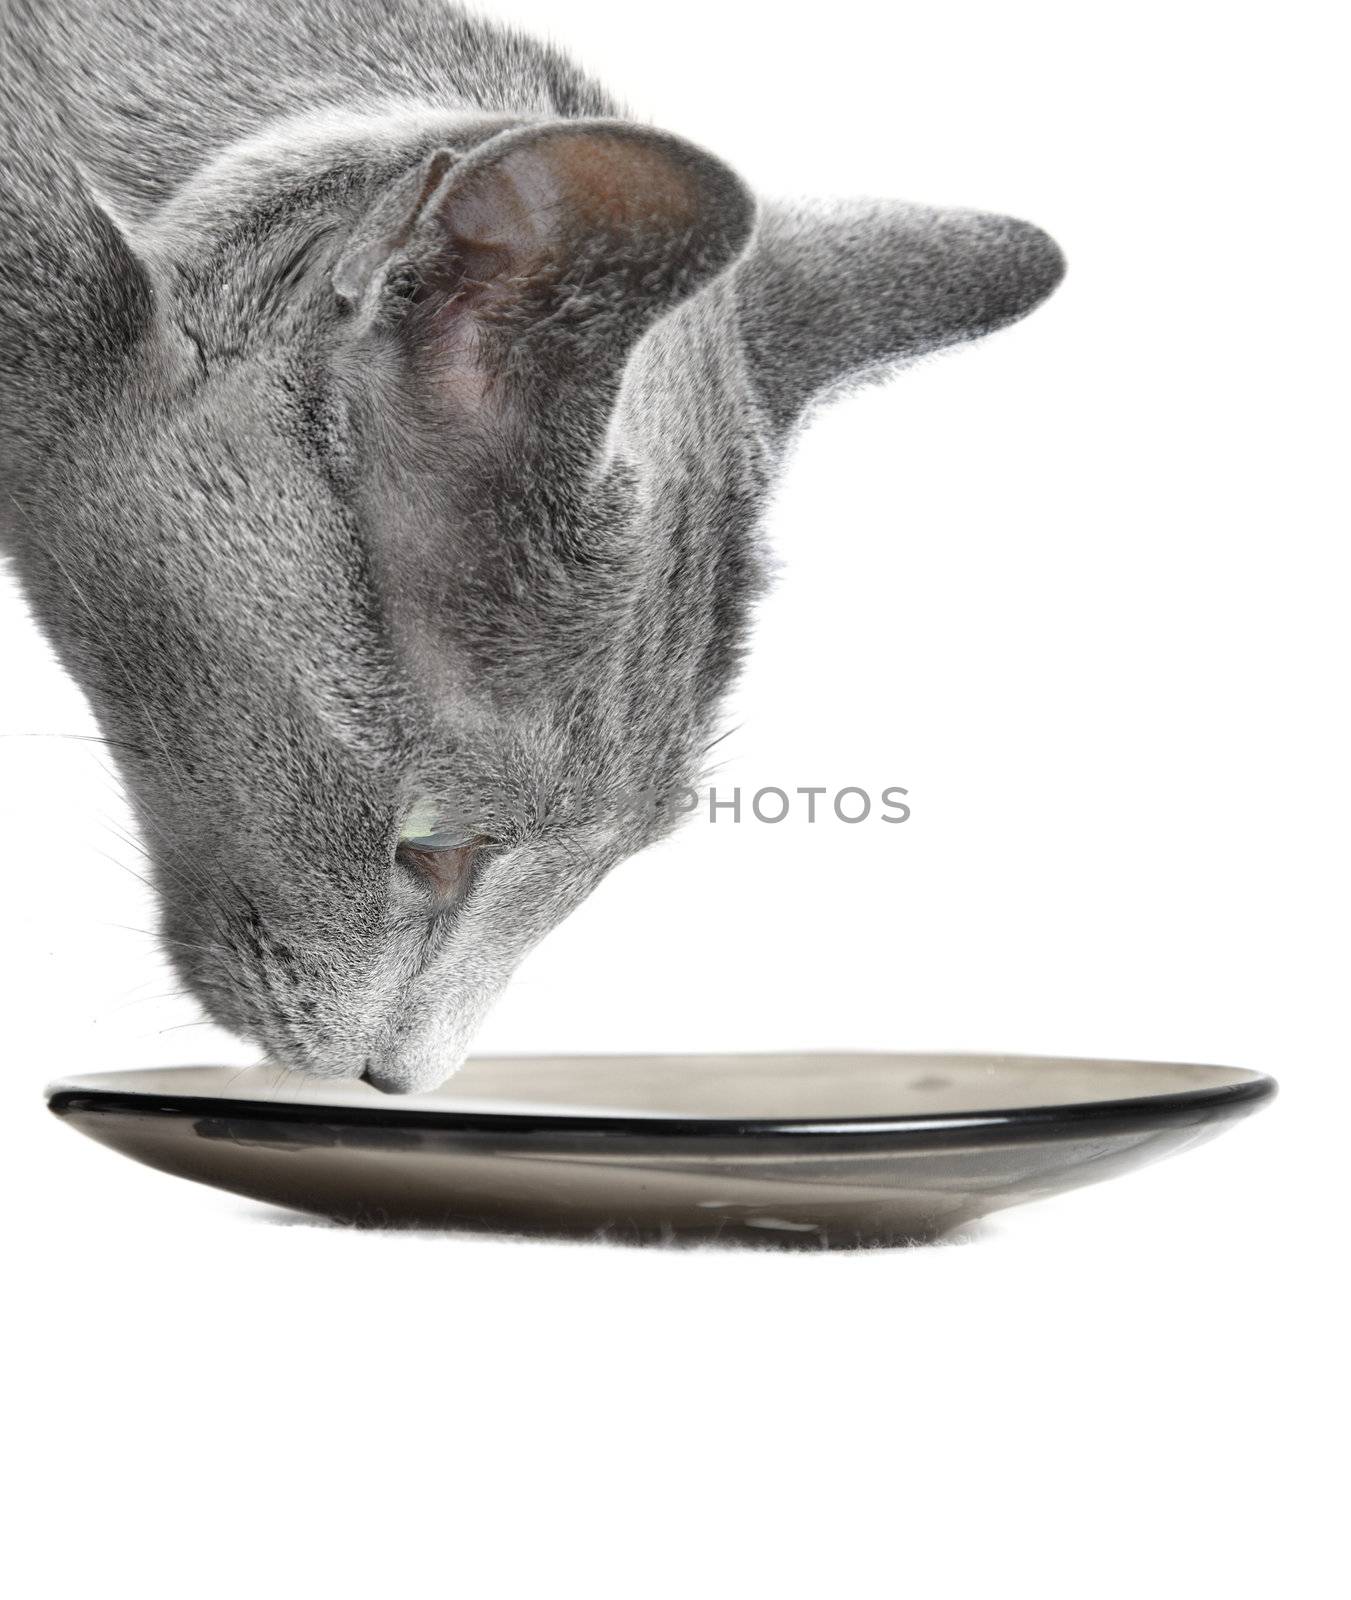 Close-up headshot of the cat drinking milk on a white background